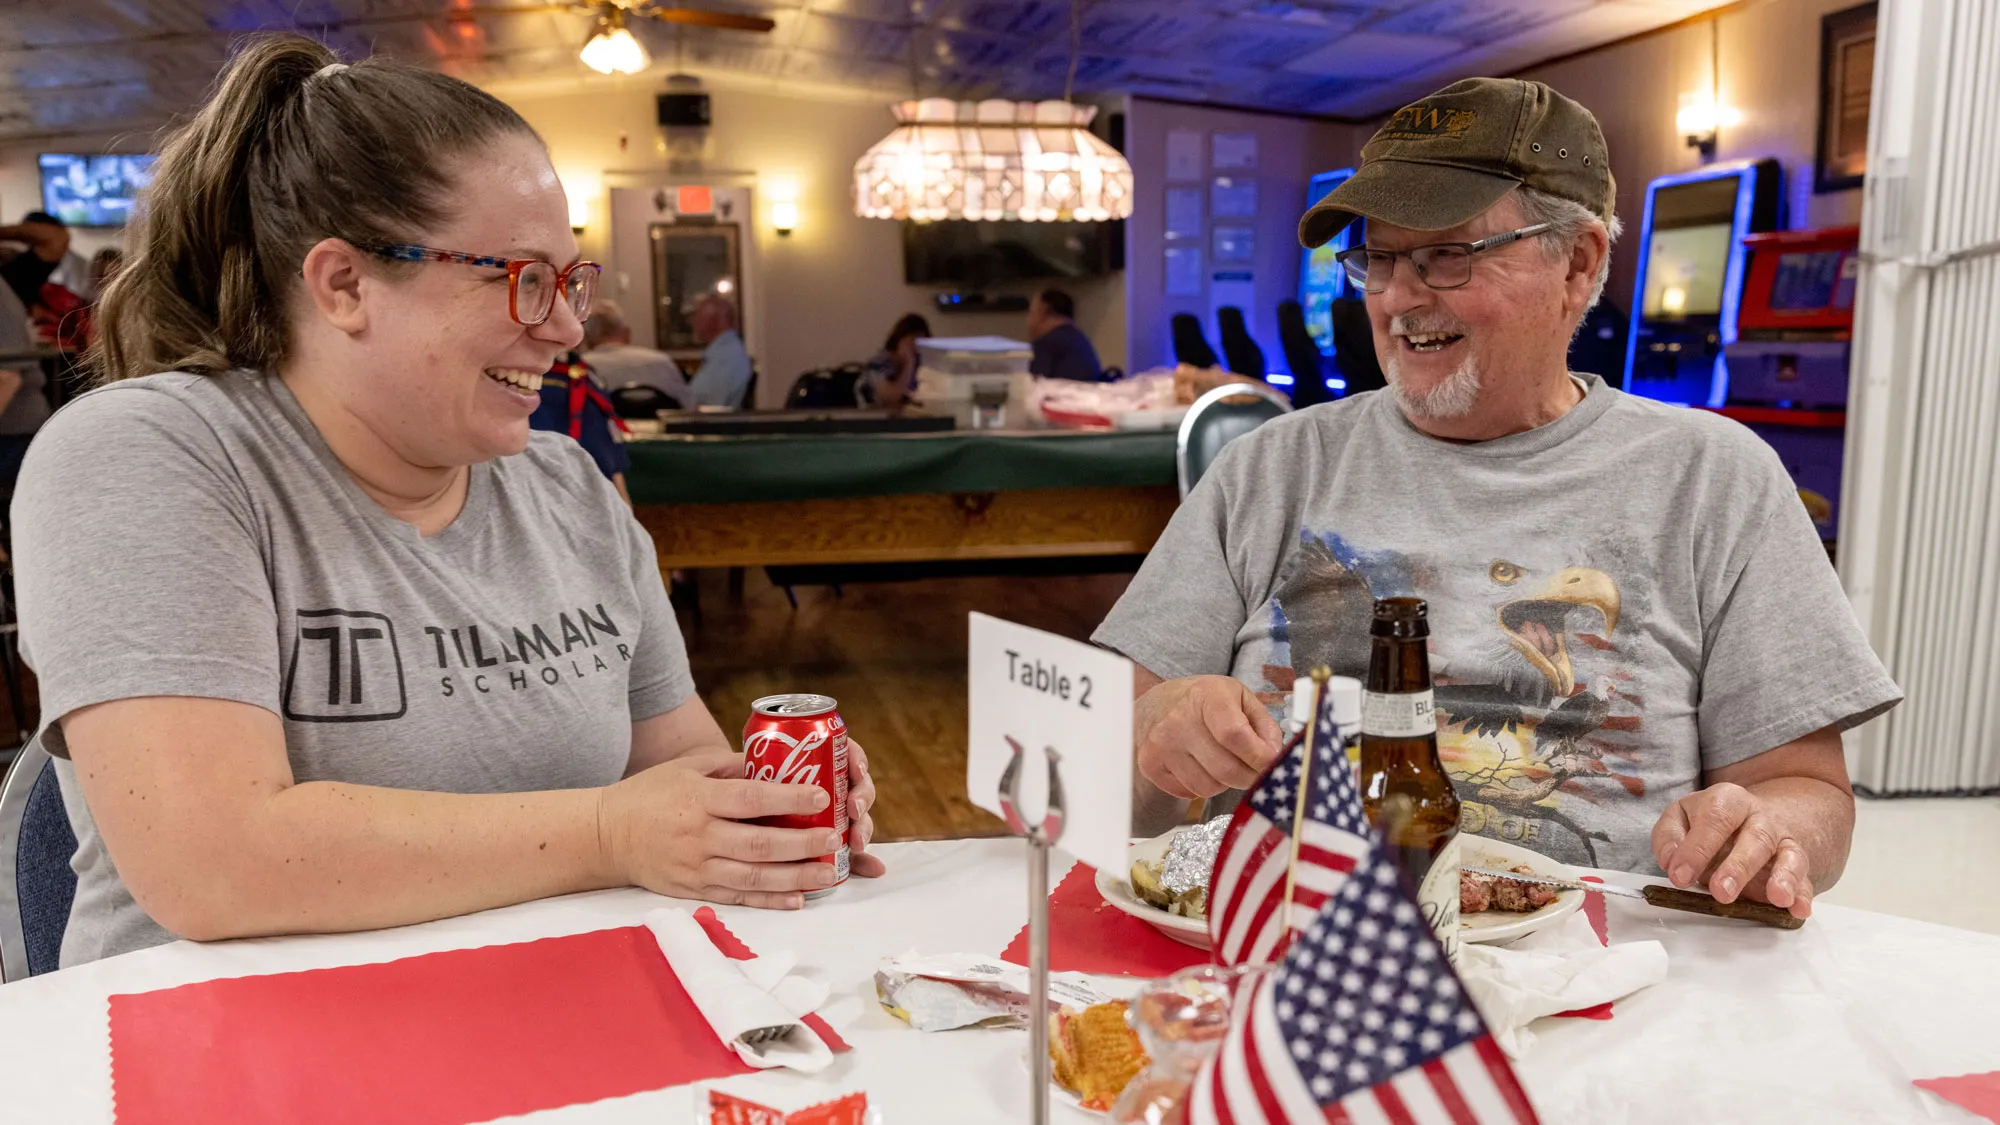 Wearing a T-shirt that says Tillman Scholar and laughing, Gretchen Klingler shares a table and chats with veteran George Walker, a gray-haired white man, at her VFW post. He’s laughing, too, and his T-shirt has a bald eagle. In front of him is a plate of food and American flags make the table centerpiece. Behind them, more people sit at tables. 